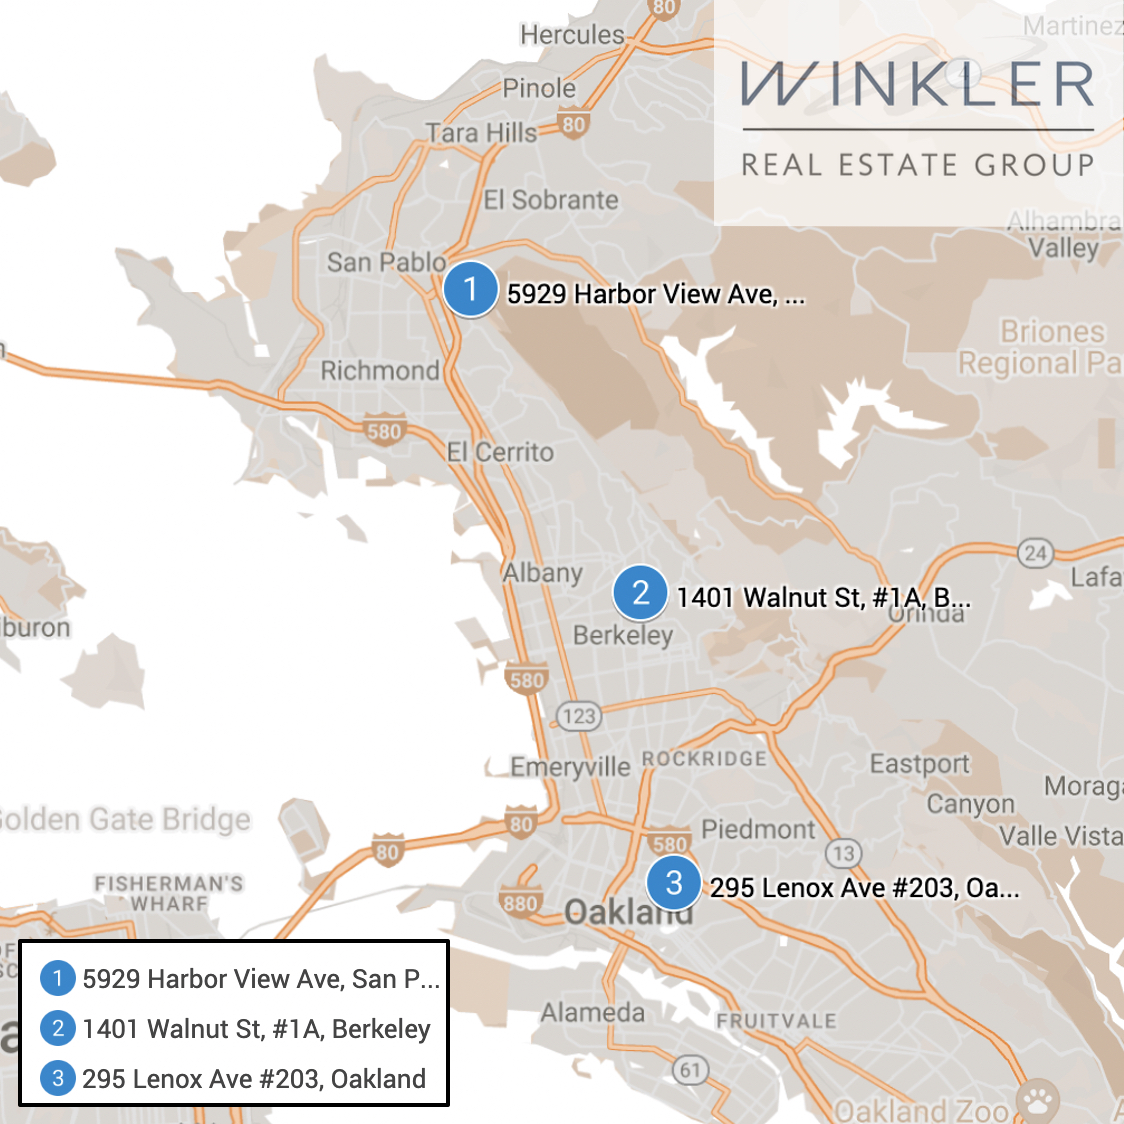 🏡 Sunday Open House w/ Winkler REG!

🗺️ Visit our map for details: ow.ly/yQZ650Oyvh7

#California #RealEstate #OpenHouse #RealEstateForSale #RealEstateAgency #CaliforniaRealEstate #SFBayArea #BayAreaRealEstate #RealEstateInvestments  #BayAreaHomes #Map